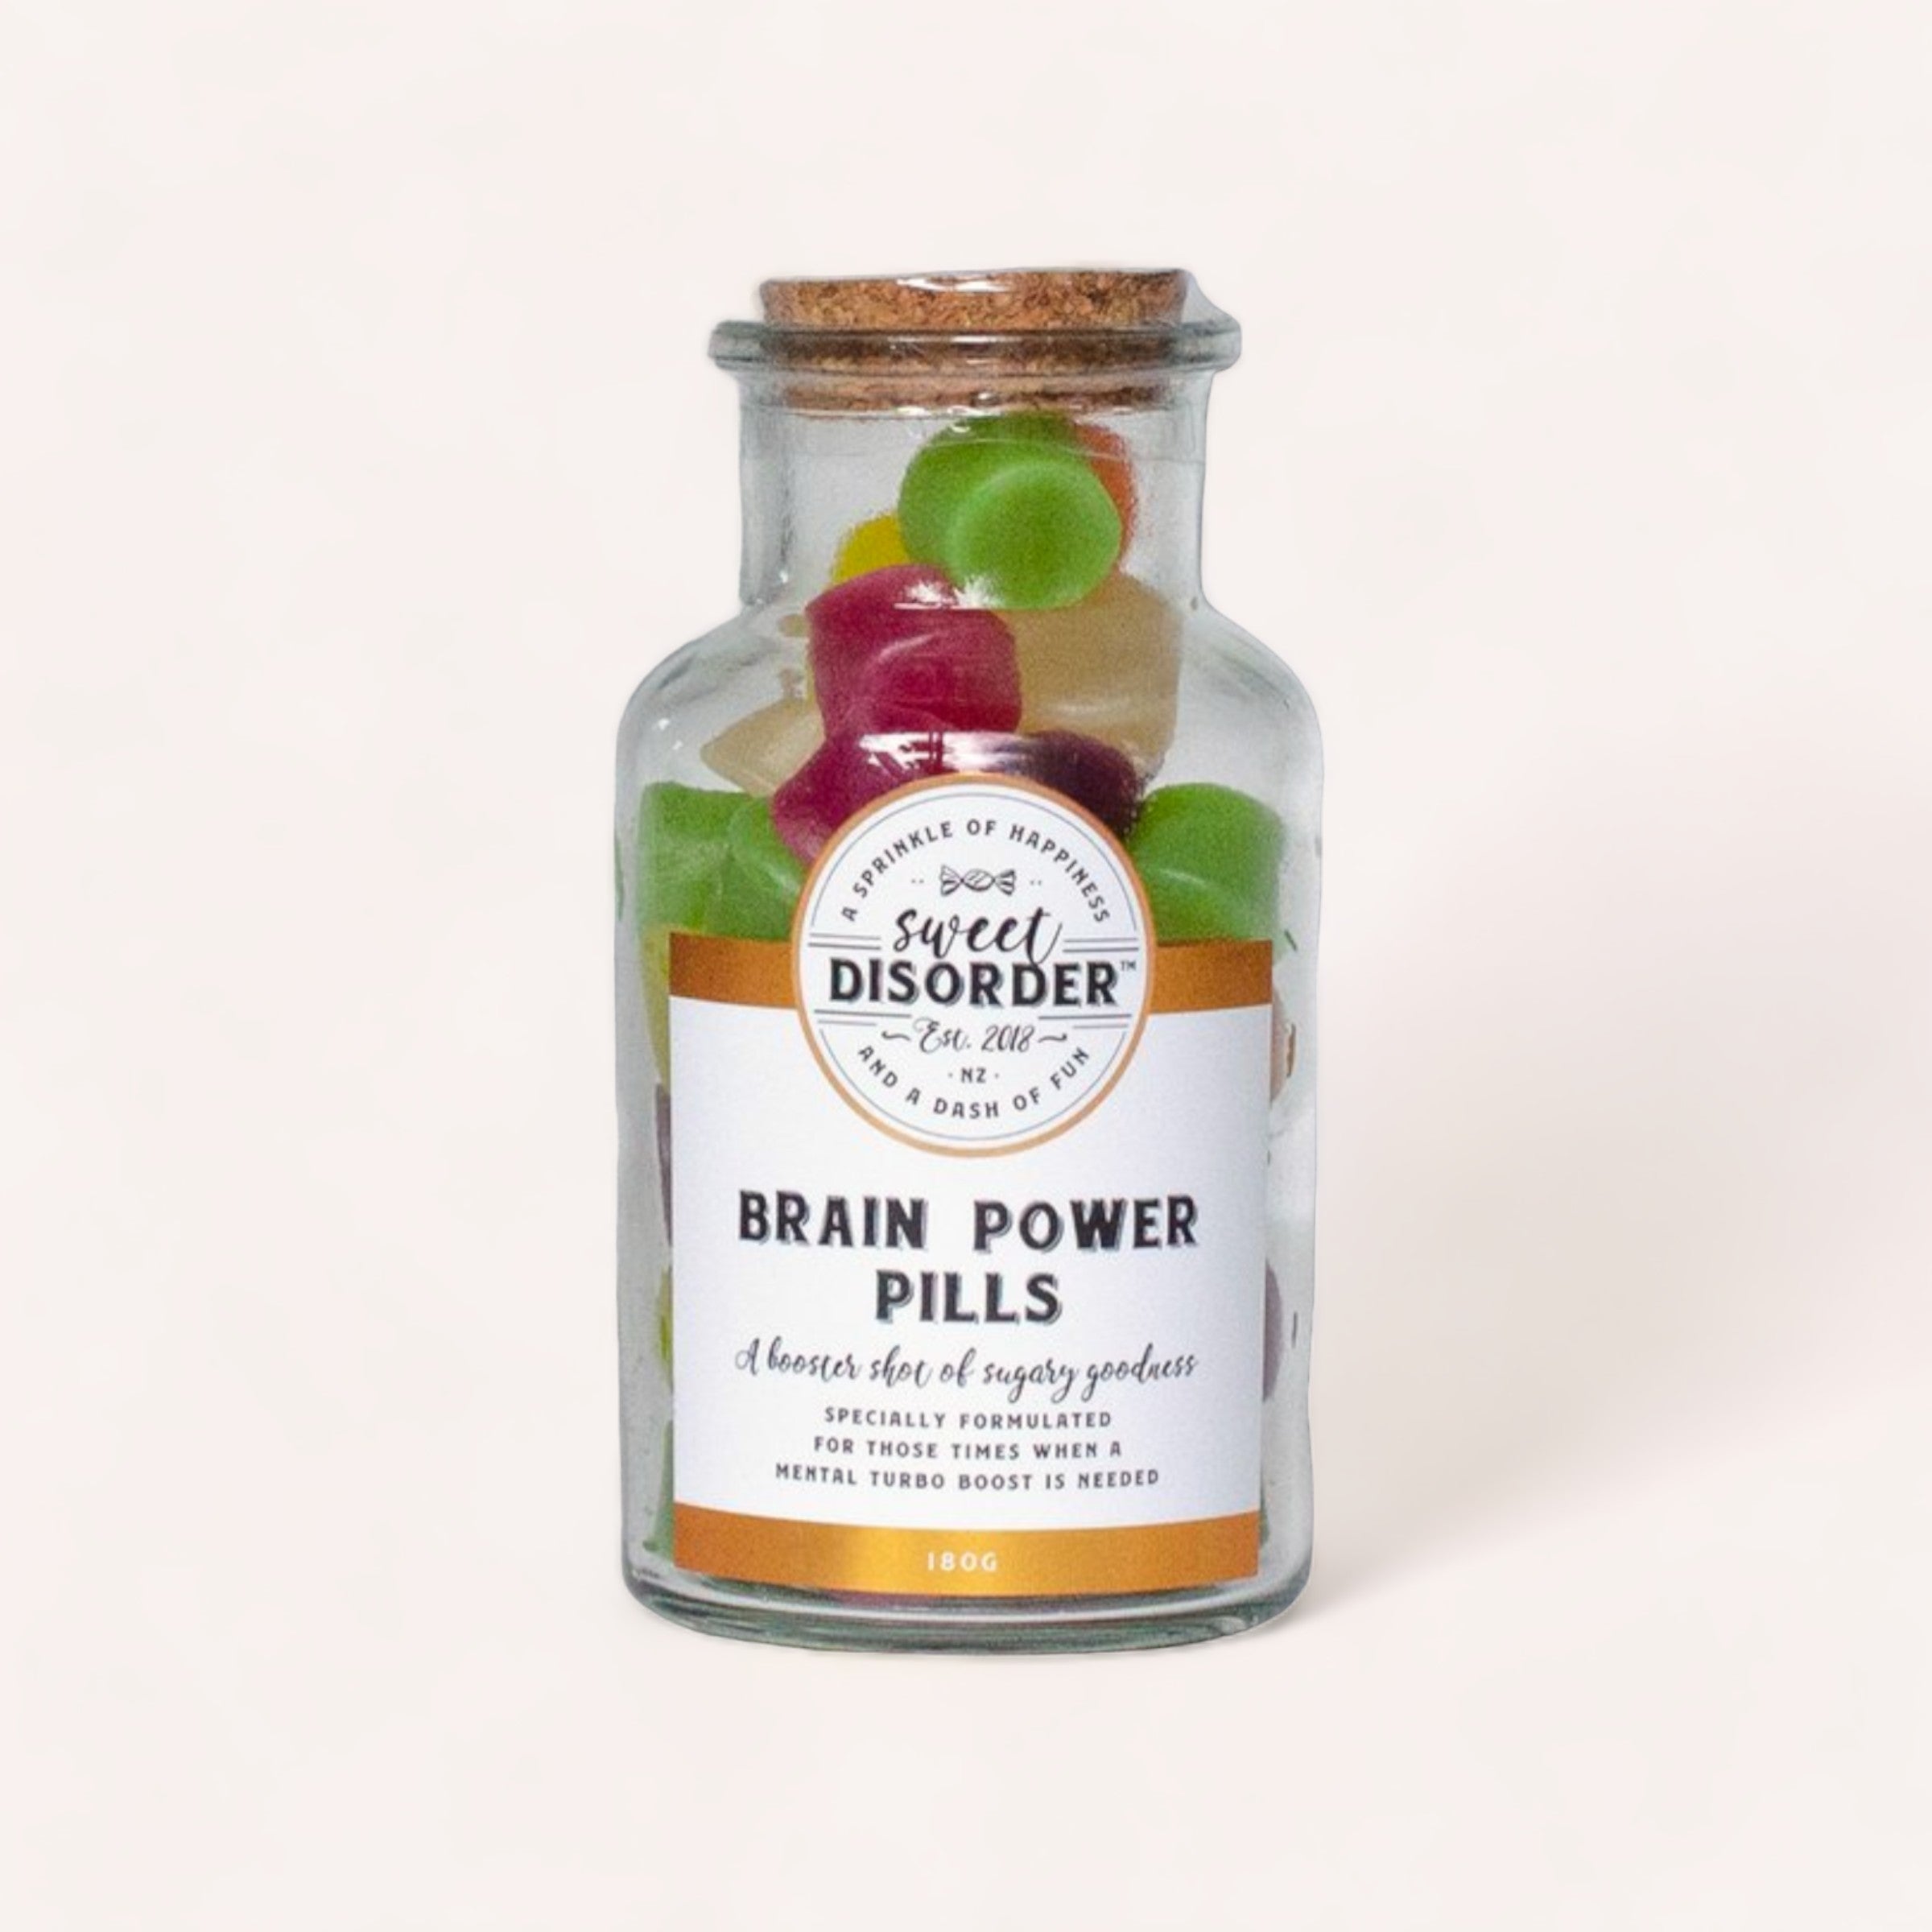 A whimsical glass jar labeled "Brain Power Pills Lollies" by Sweet Disorder, filled with colorful wine gums, playfully presented as a boost of sugary goodness for the mind.